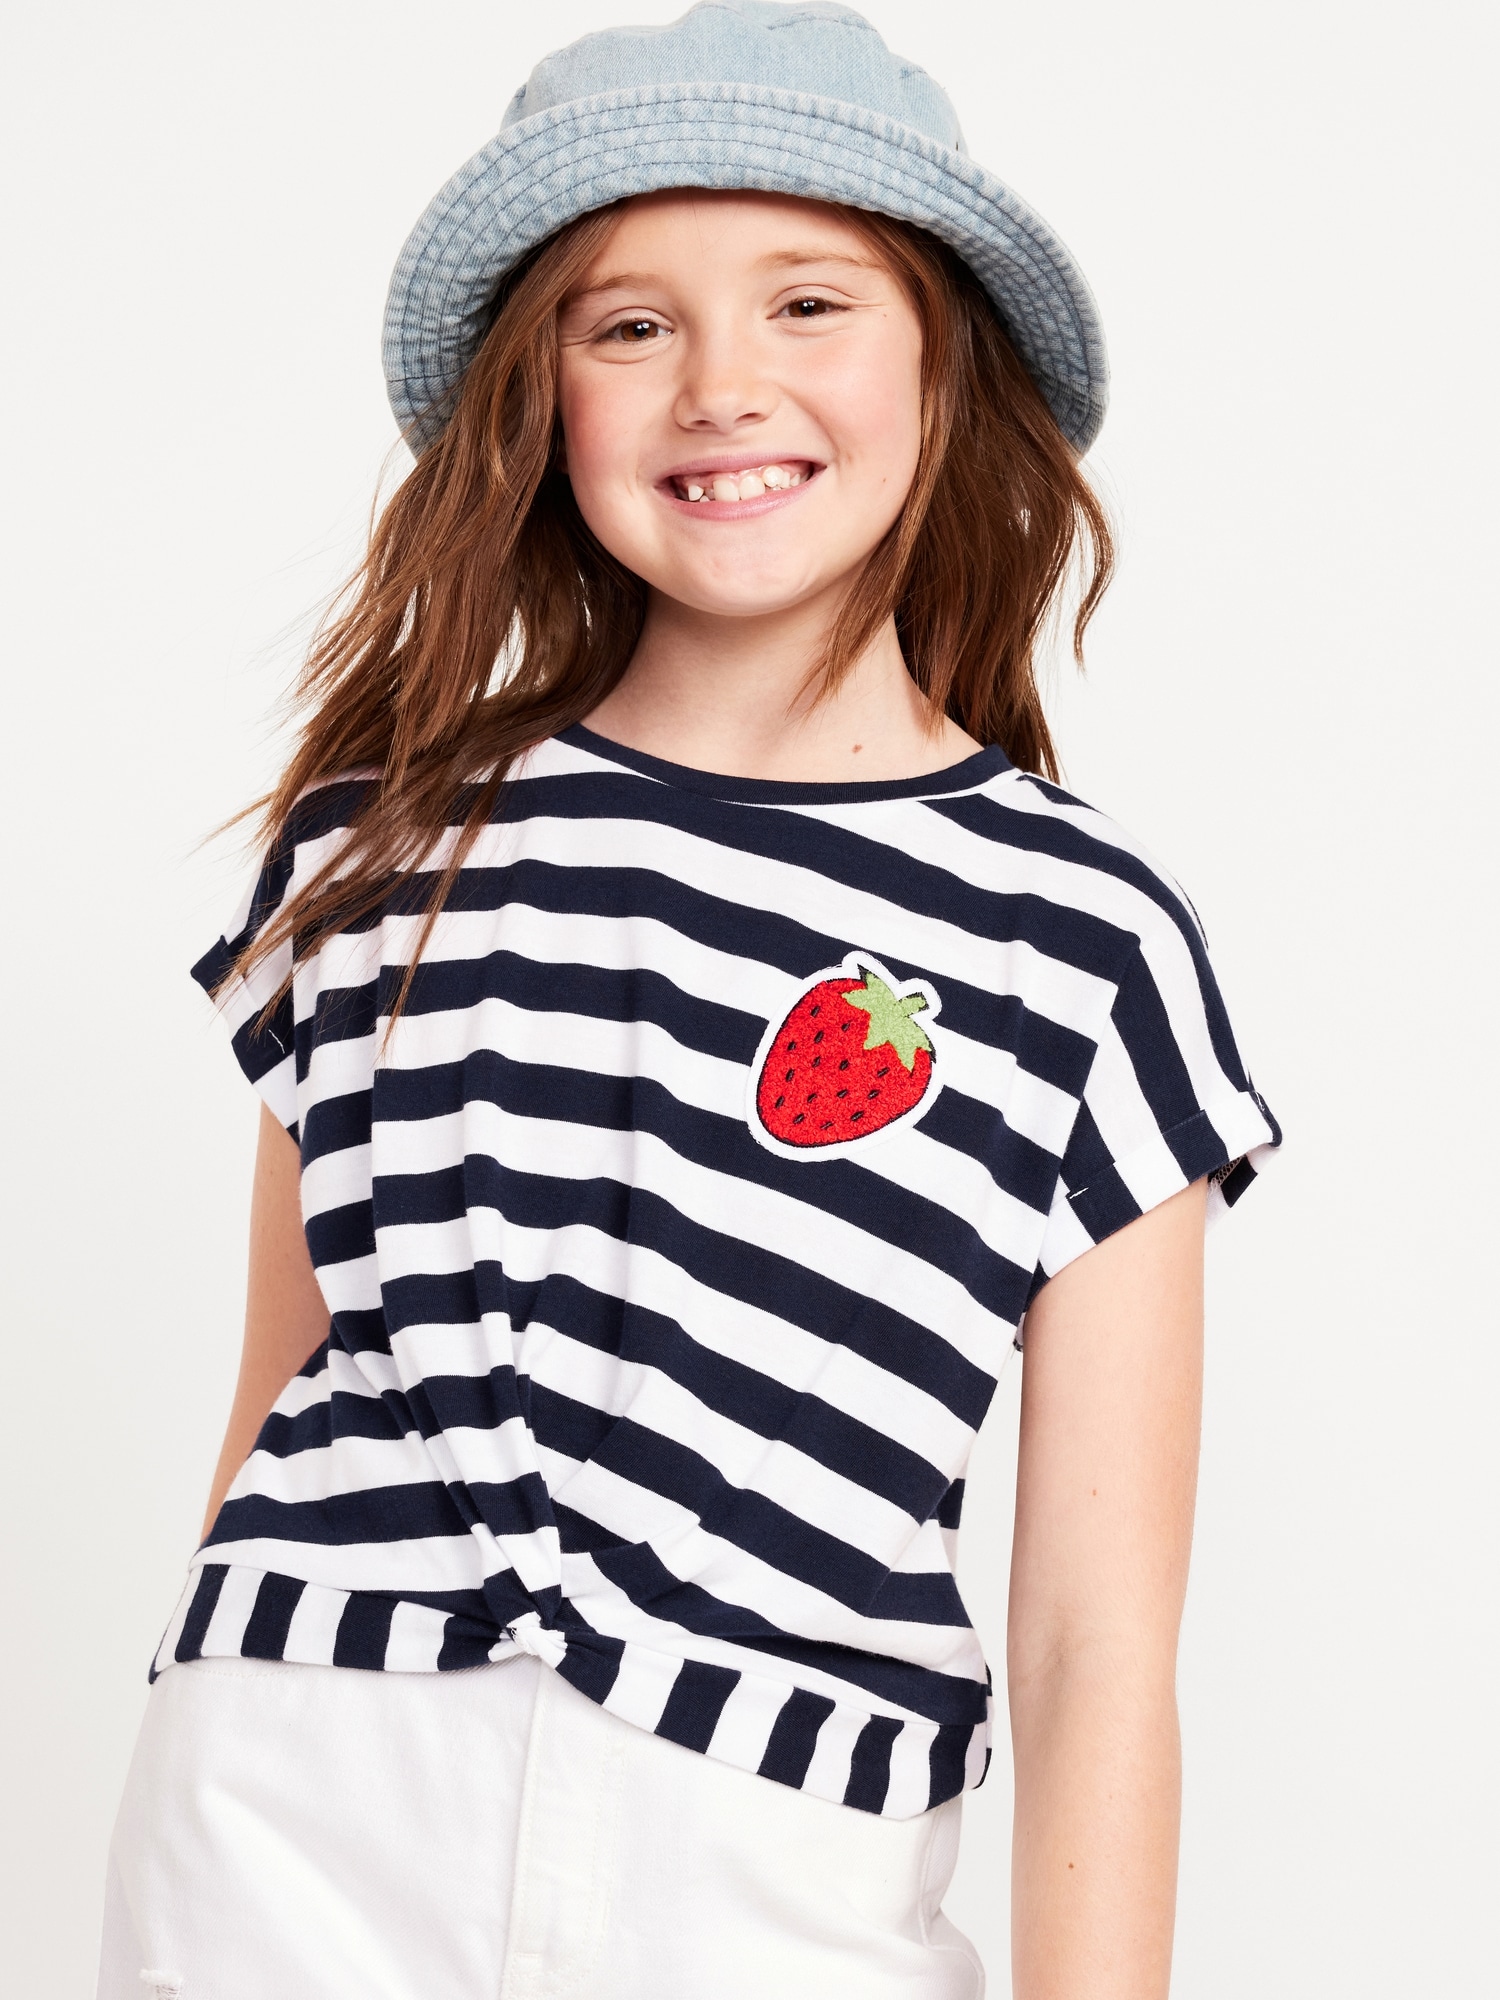 Printed Short-Sleeve Twist-Front T-Shirt for Girls Hot Deal